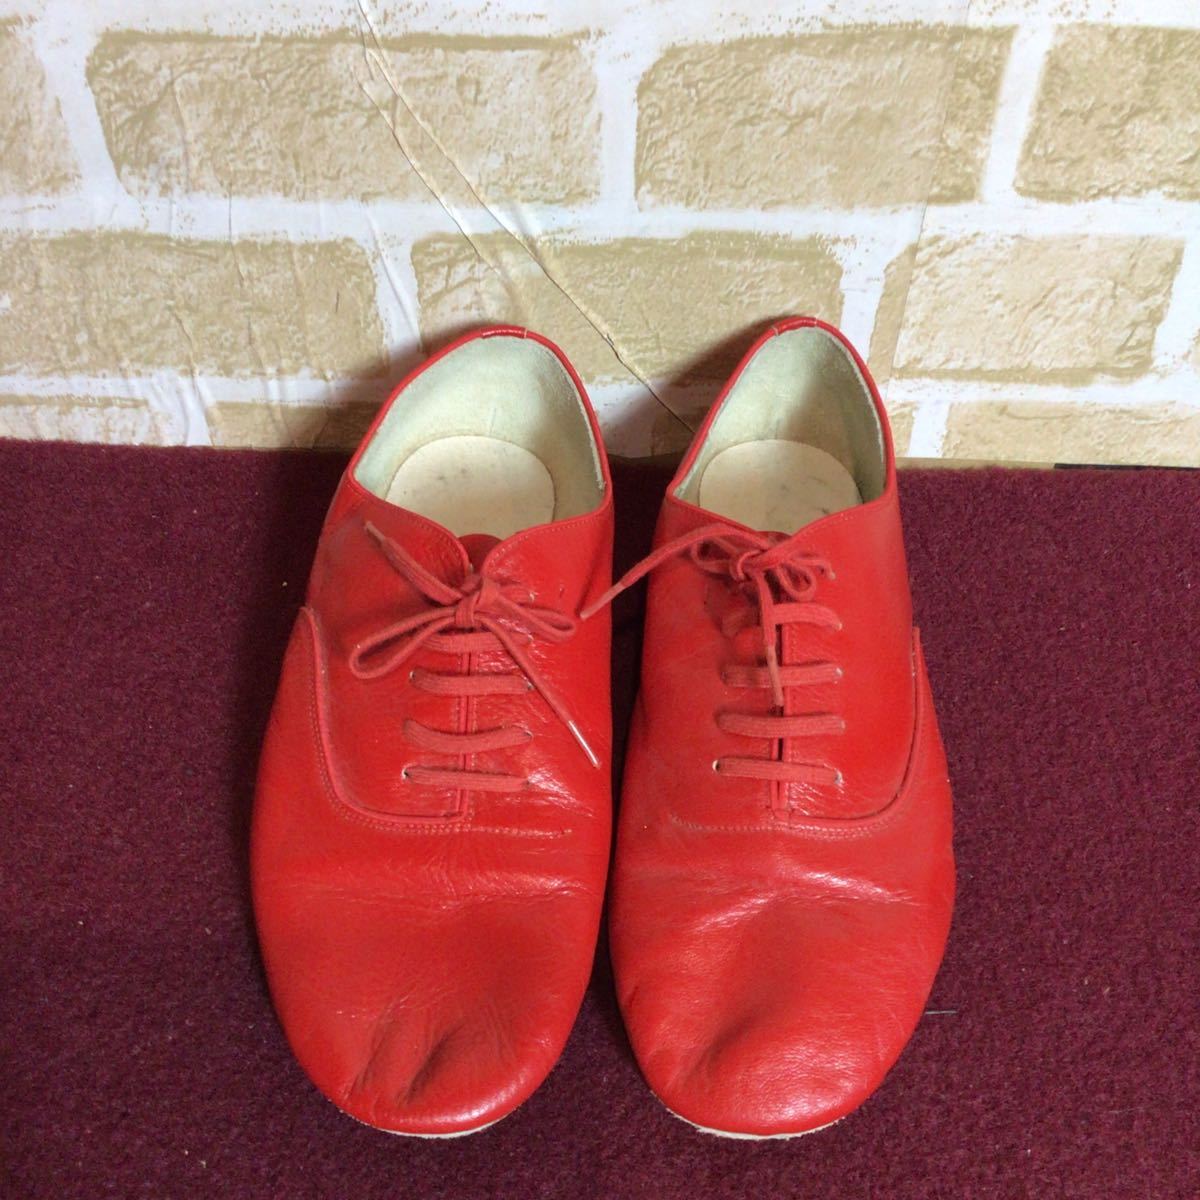 [ selling out! free shipping!]A-199 Chacott! Dance shoes! red!25.0cm! Jazz! Dan sa-! tea cot! hobby! work! change for also! used!